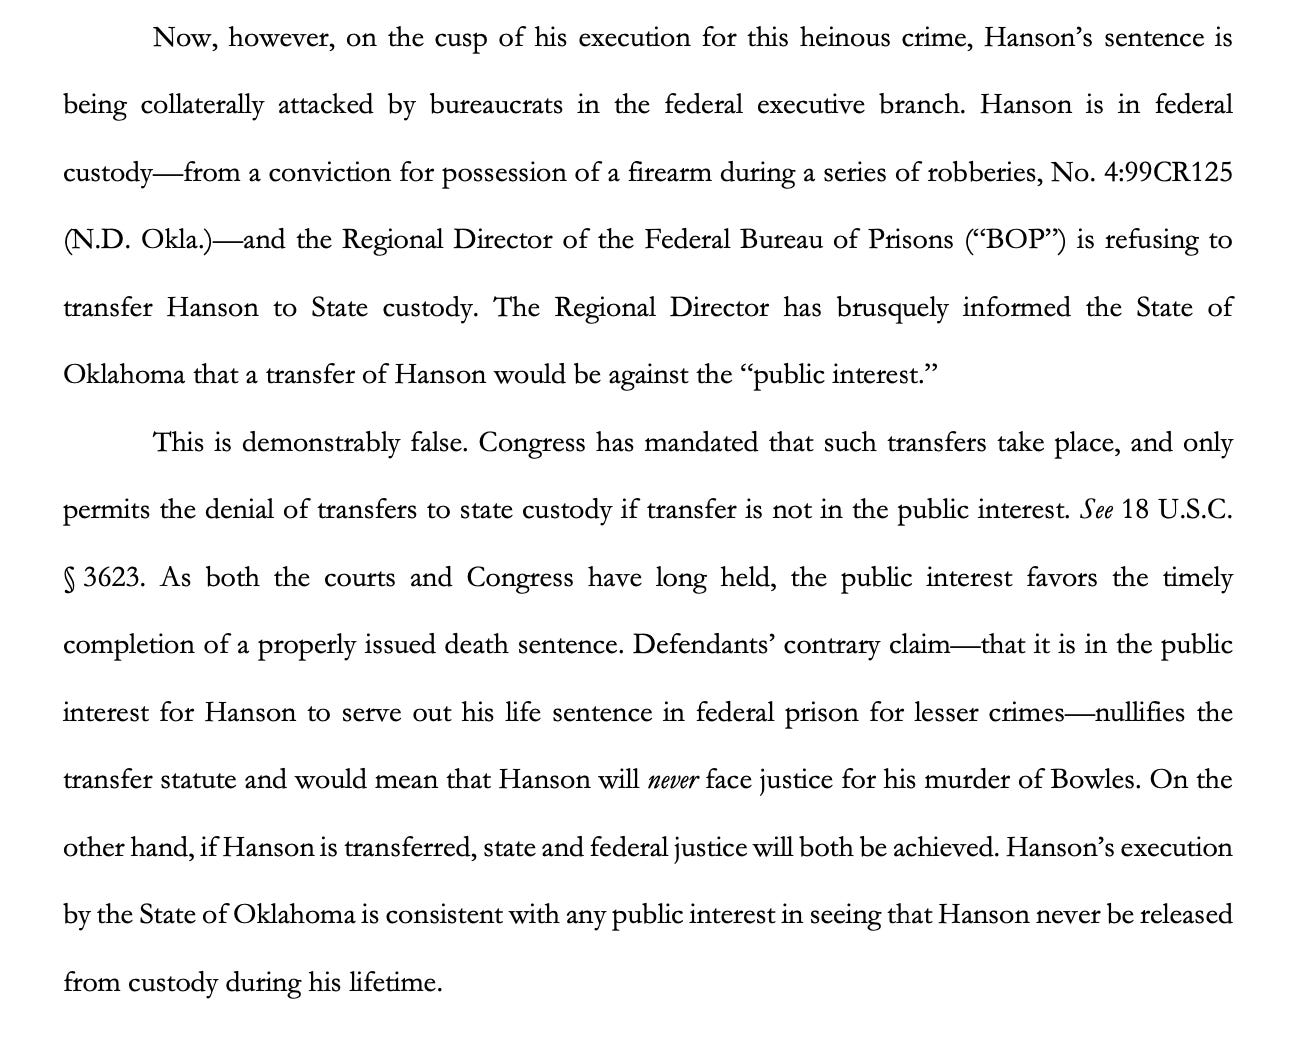 The Regional Director [of BOP] has brusquely informed the State of Oklahoma that a transfer of Hanson would be against the “public interest.”  This is demonstrably false. Congress has mandated that such transfers take place, and only permits the denial of transfers to state custody if transfer is not in the public interest. See 18 U.S.C. § 3623. As both the courts and Congress have long held, the public interest favors the timely completion of a properly issued death sentence. Defendants’ contrary claim—that it is in the public interest for Hanson to serve out his life sentence in federal prison for lesser crimes—nullifies the transfer statute and would mean that Hanson will never face justice for his murder of Bowles. On the other hand, if Hanson is transferred, state and federal justice will both be achieved. Hanson’s execution by the State of Oklahoma is consistent with any public interest in seeing that Hanson never be released from custody during his lifetime.